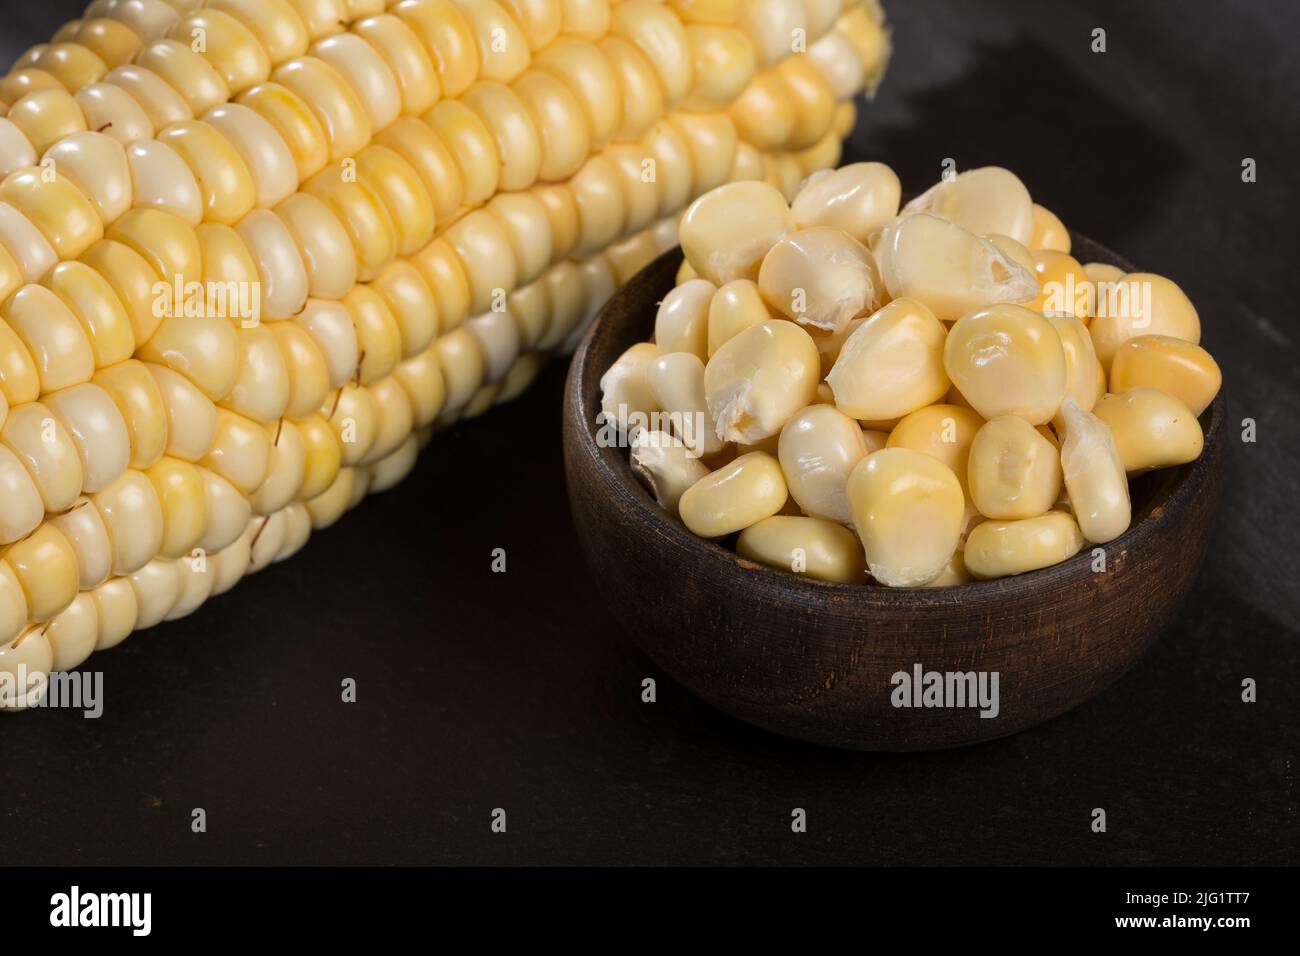 Zea mays - Wooden bowl with fresh corn kernels. Stock Photo